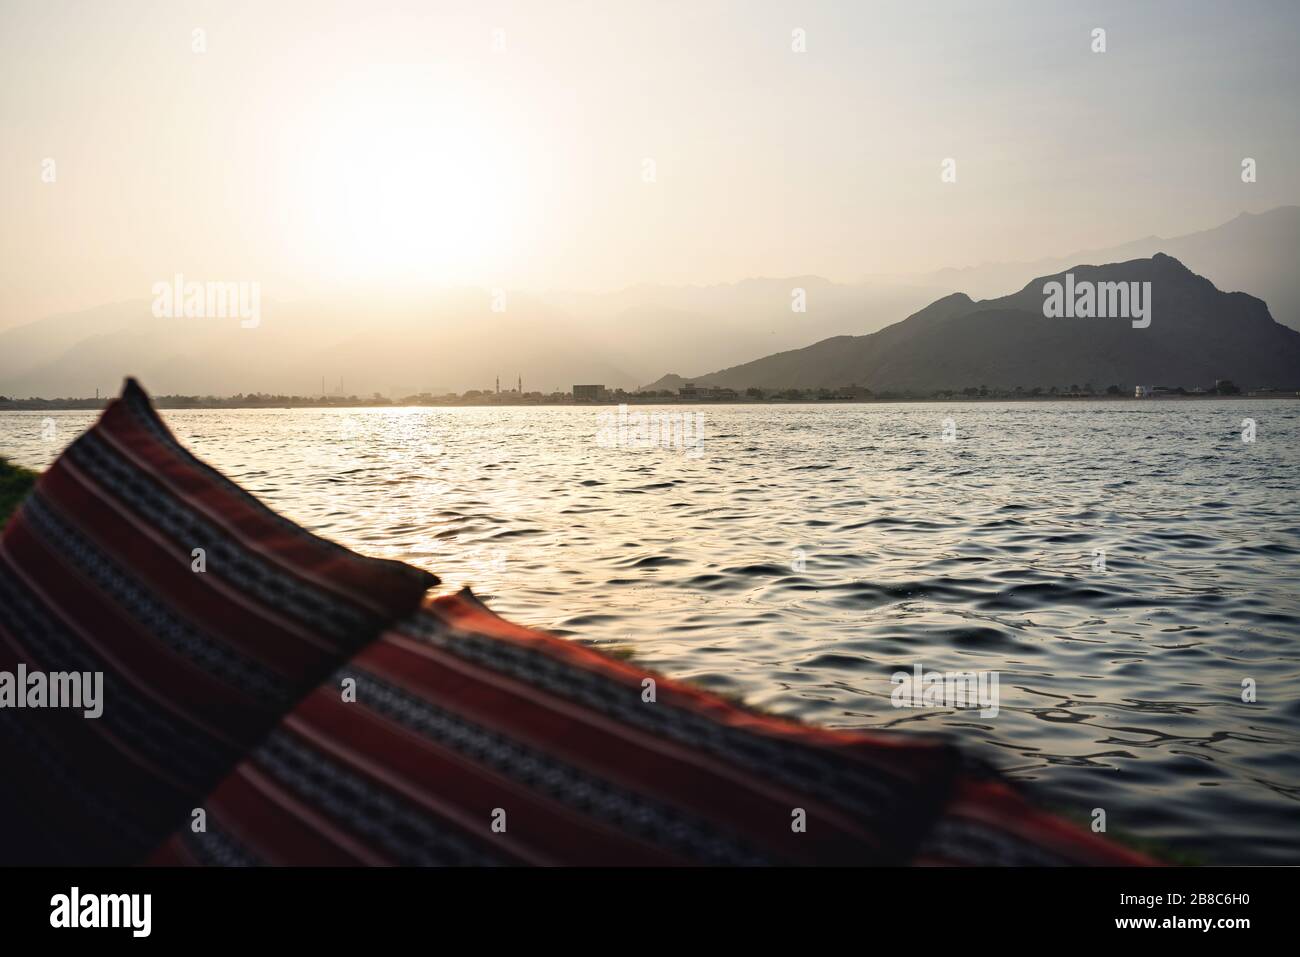 Dhow boat cruise in Musandam Peninsula in Oman at sunset. View from tourist sail ship to mountains and traditional Omani town with mosques. Stock Photo